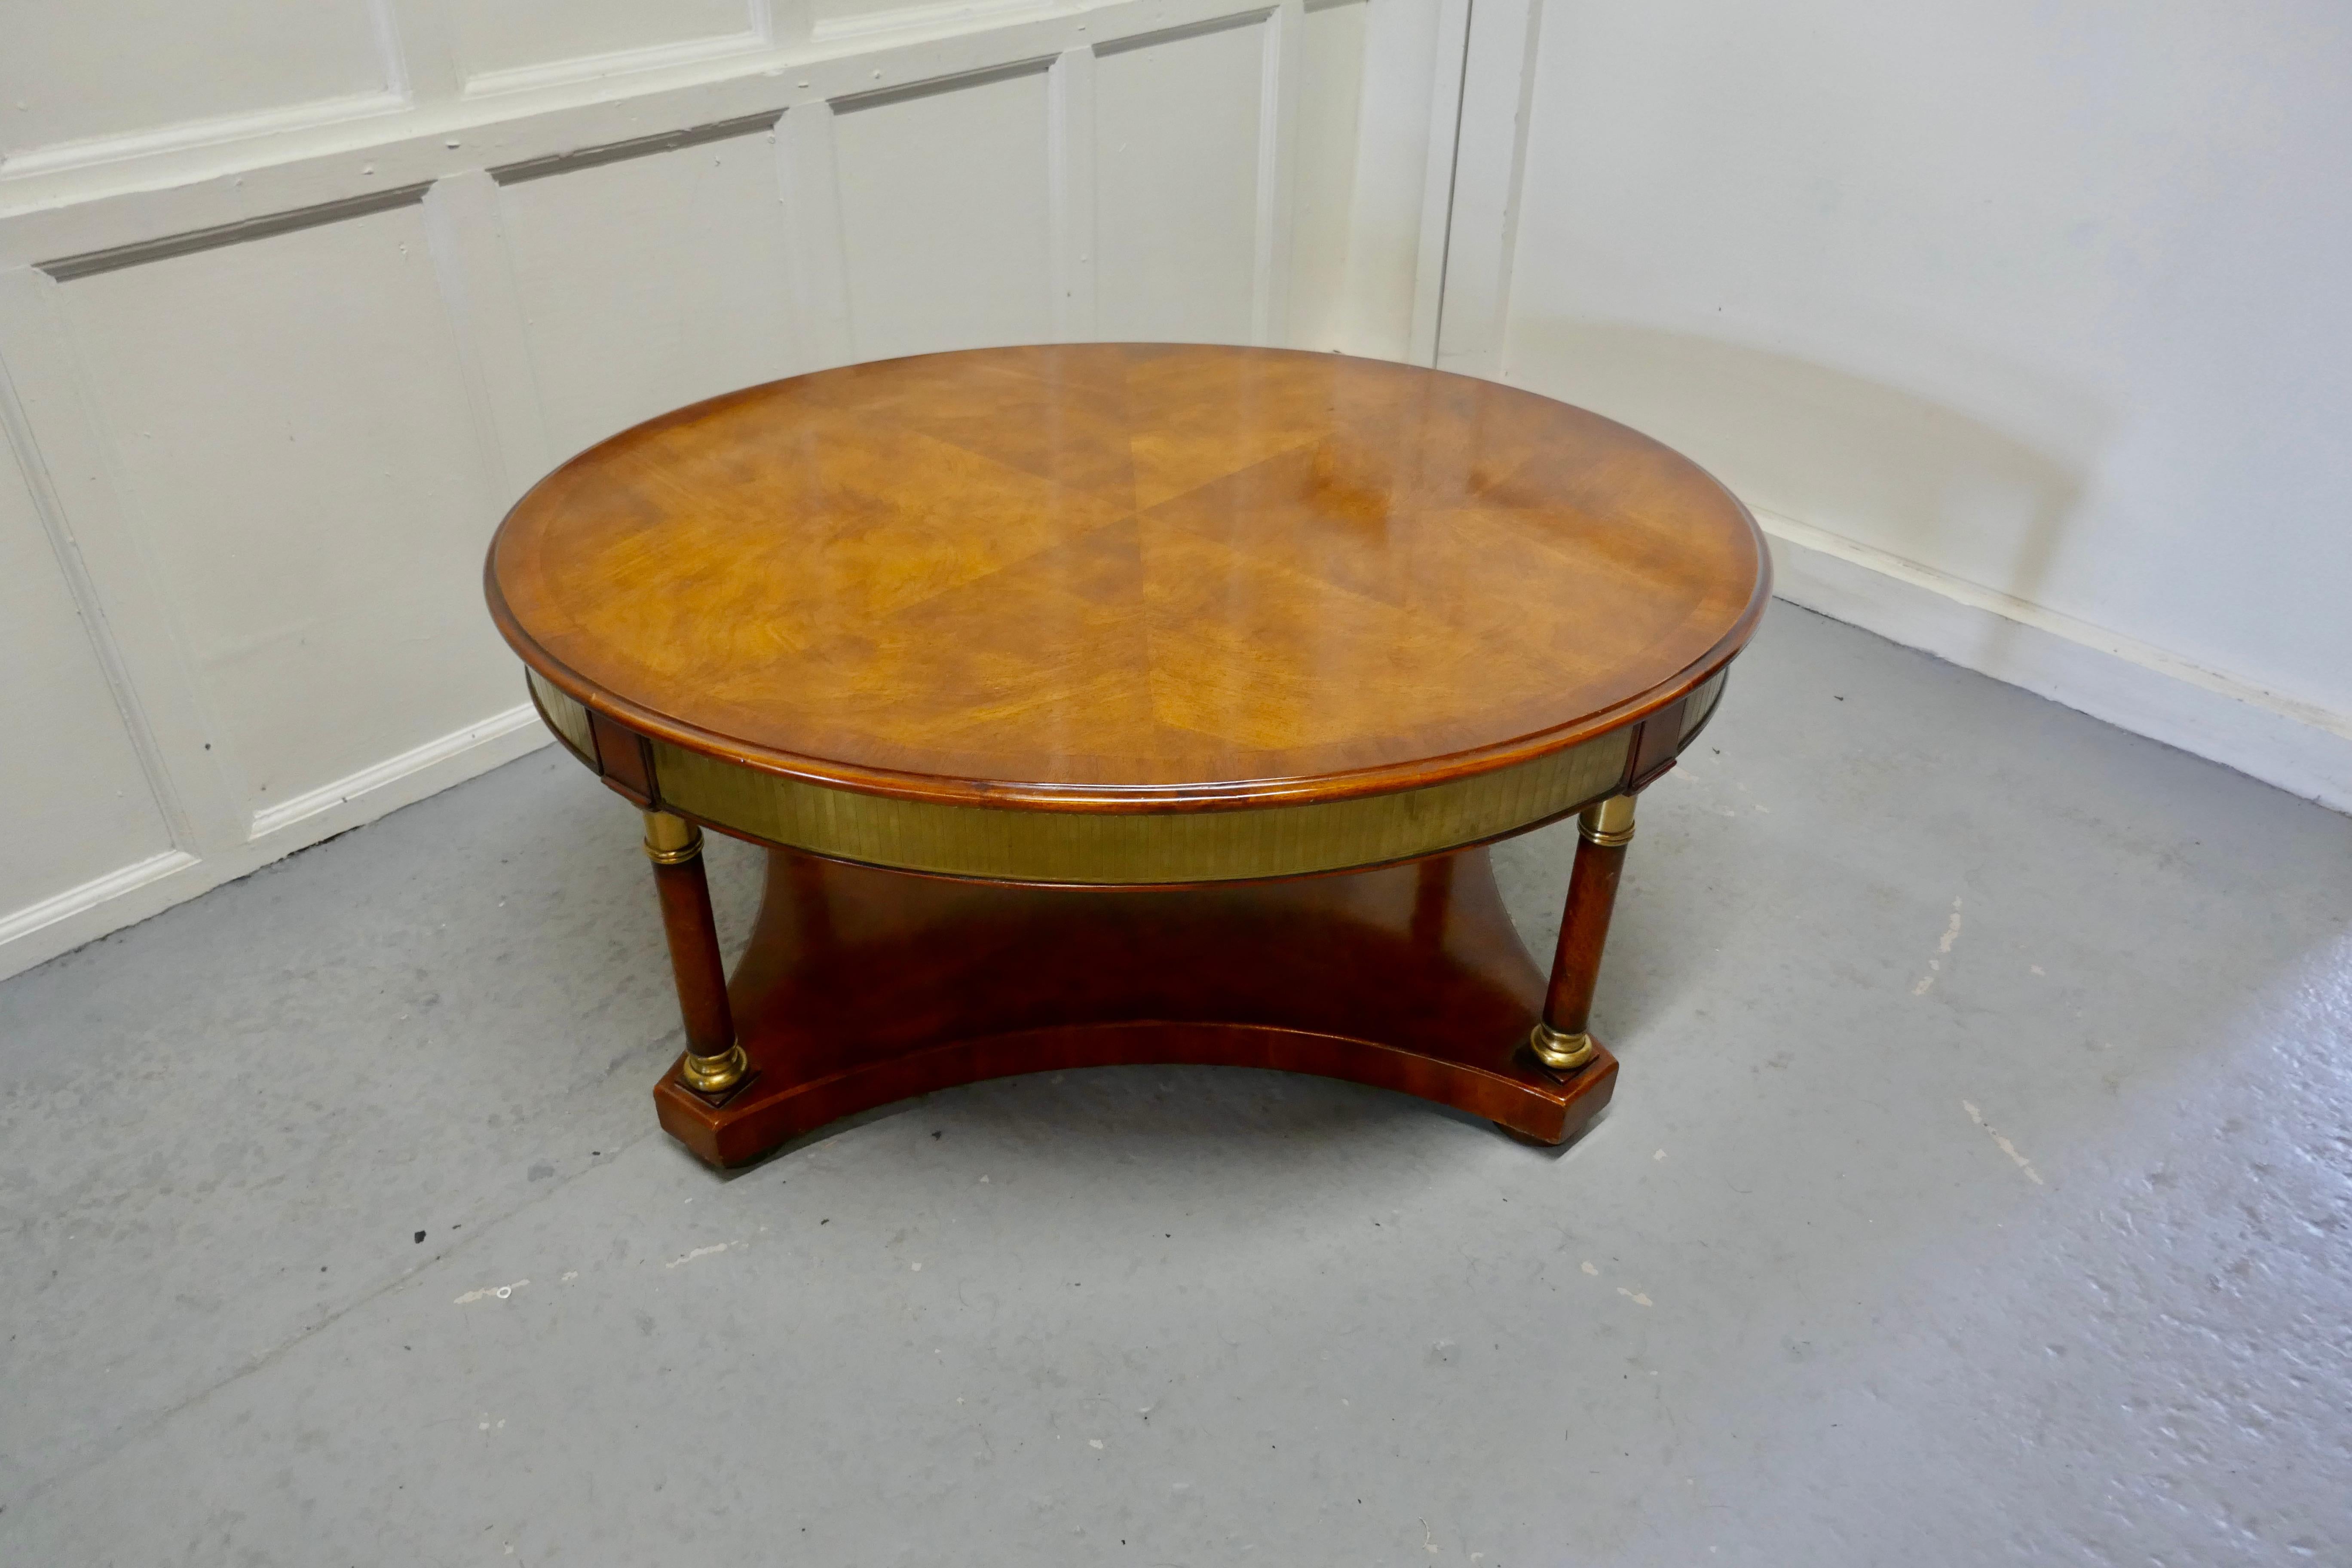 A large regency walnut and brass oval coffee table

This is a very attractive piece, it is made in the style of a regency games table, with applied brass decoration
The table is very fine quality and a very heavy piece, it stands on 4 column legs